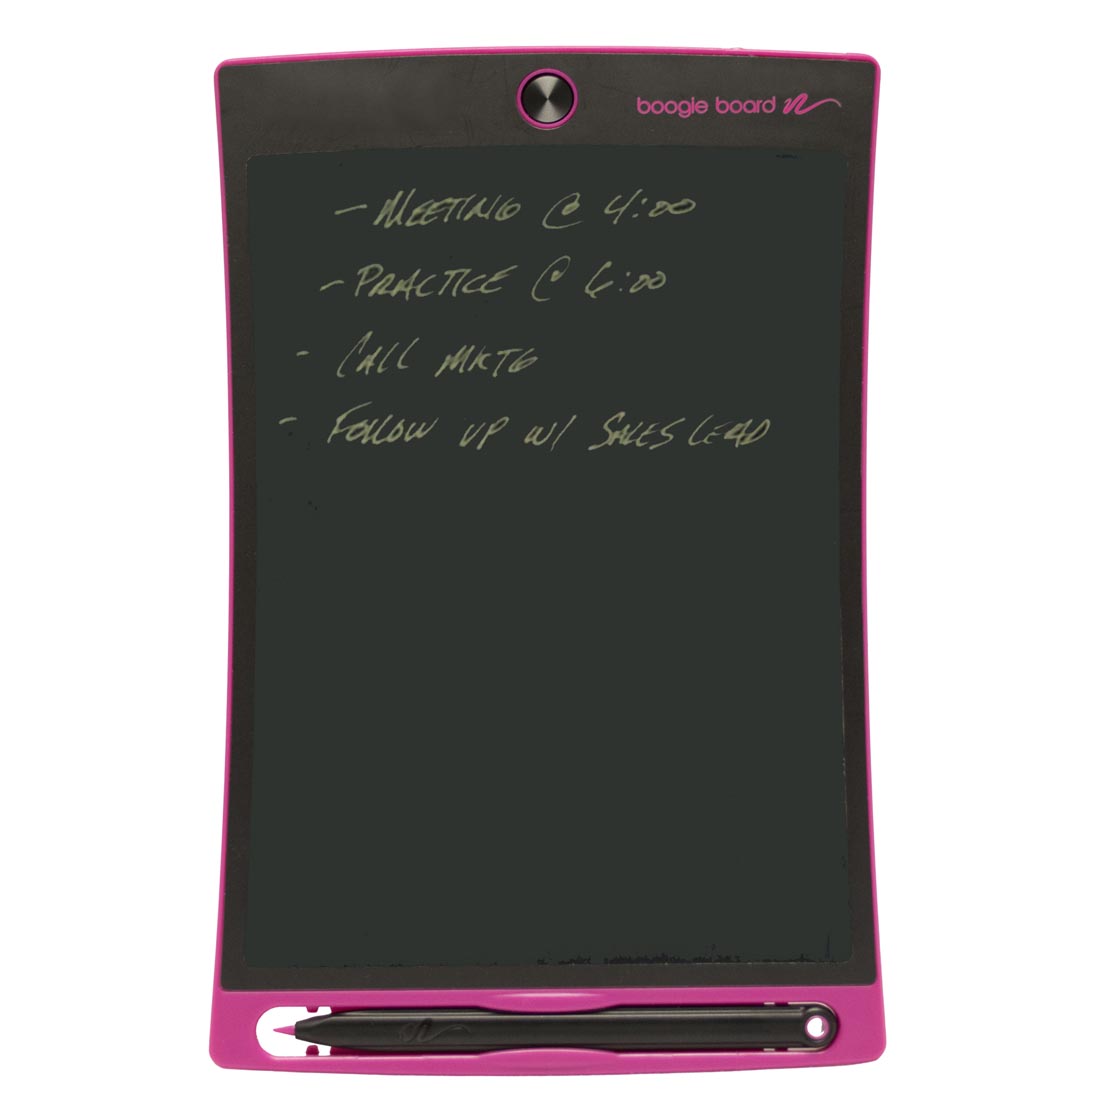 Pink Boogie Board Jot 8.5 LCD eWriter shown with a schedule checklist of Meeting, Practice, etc.